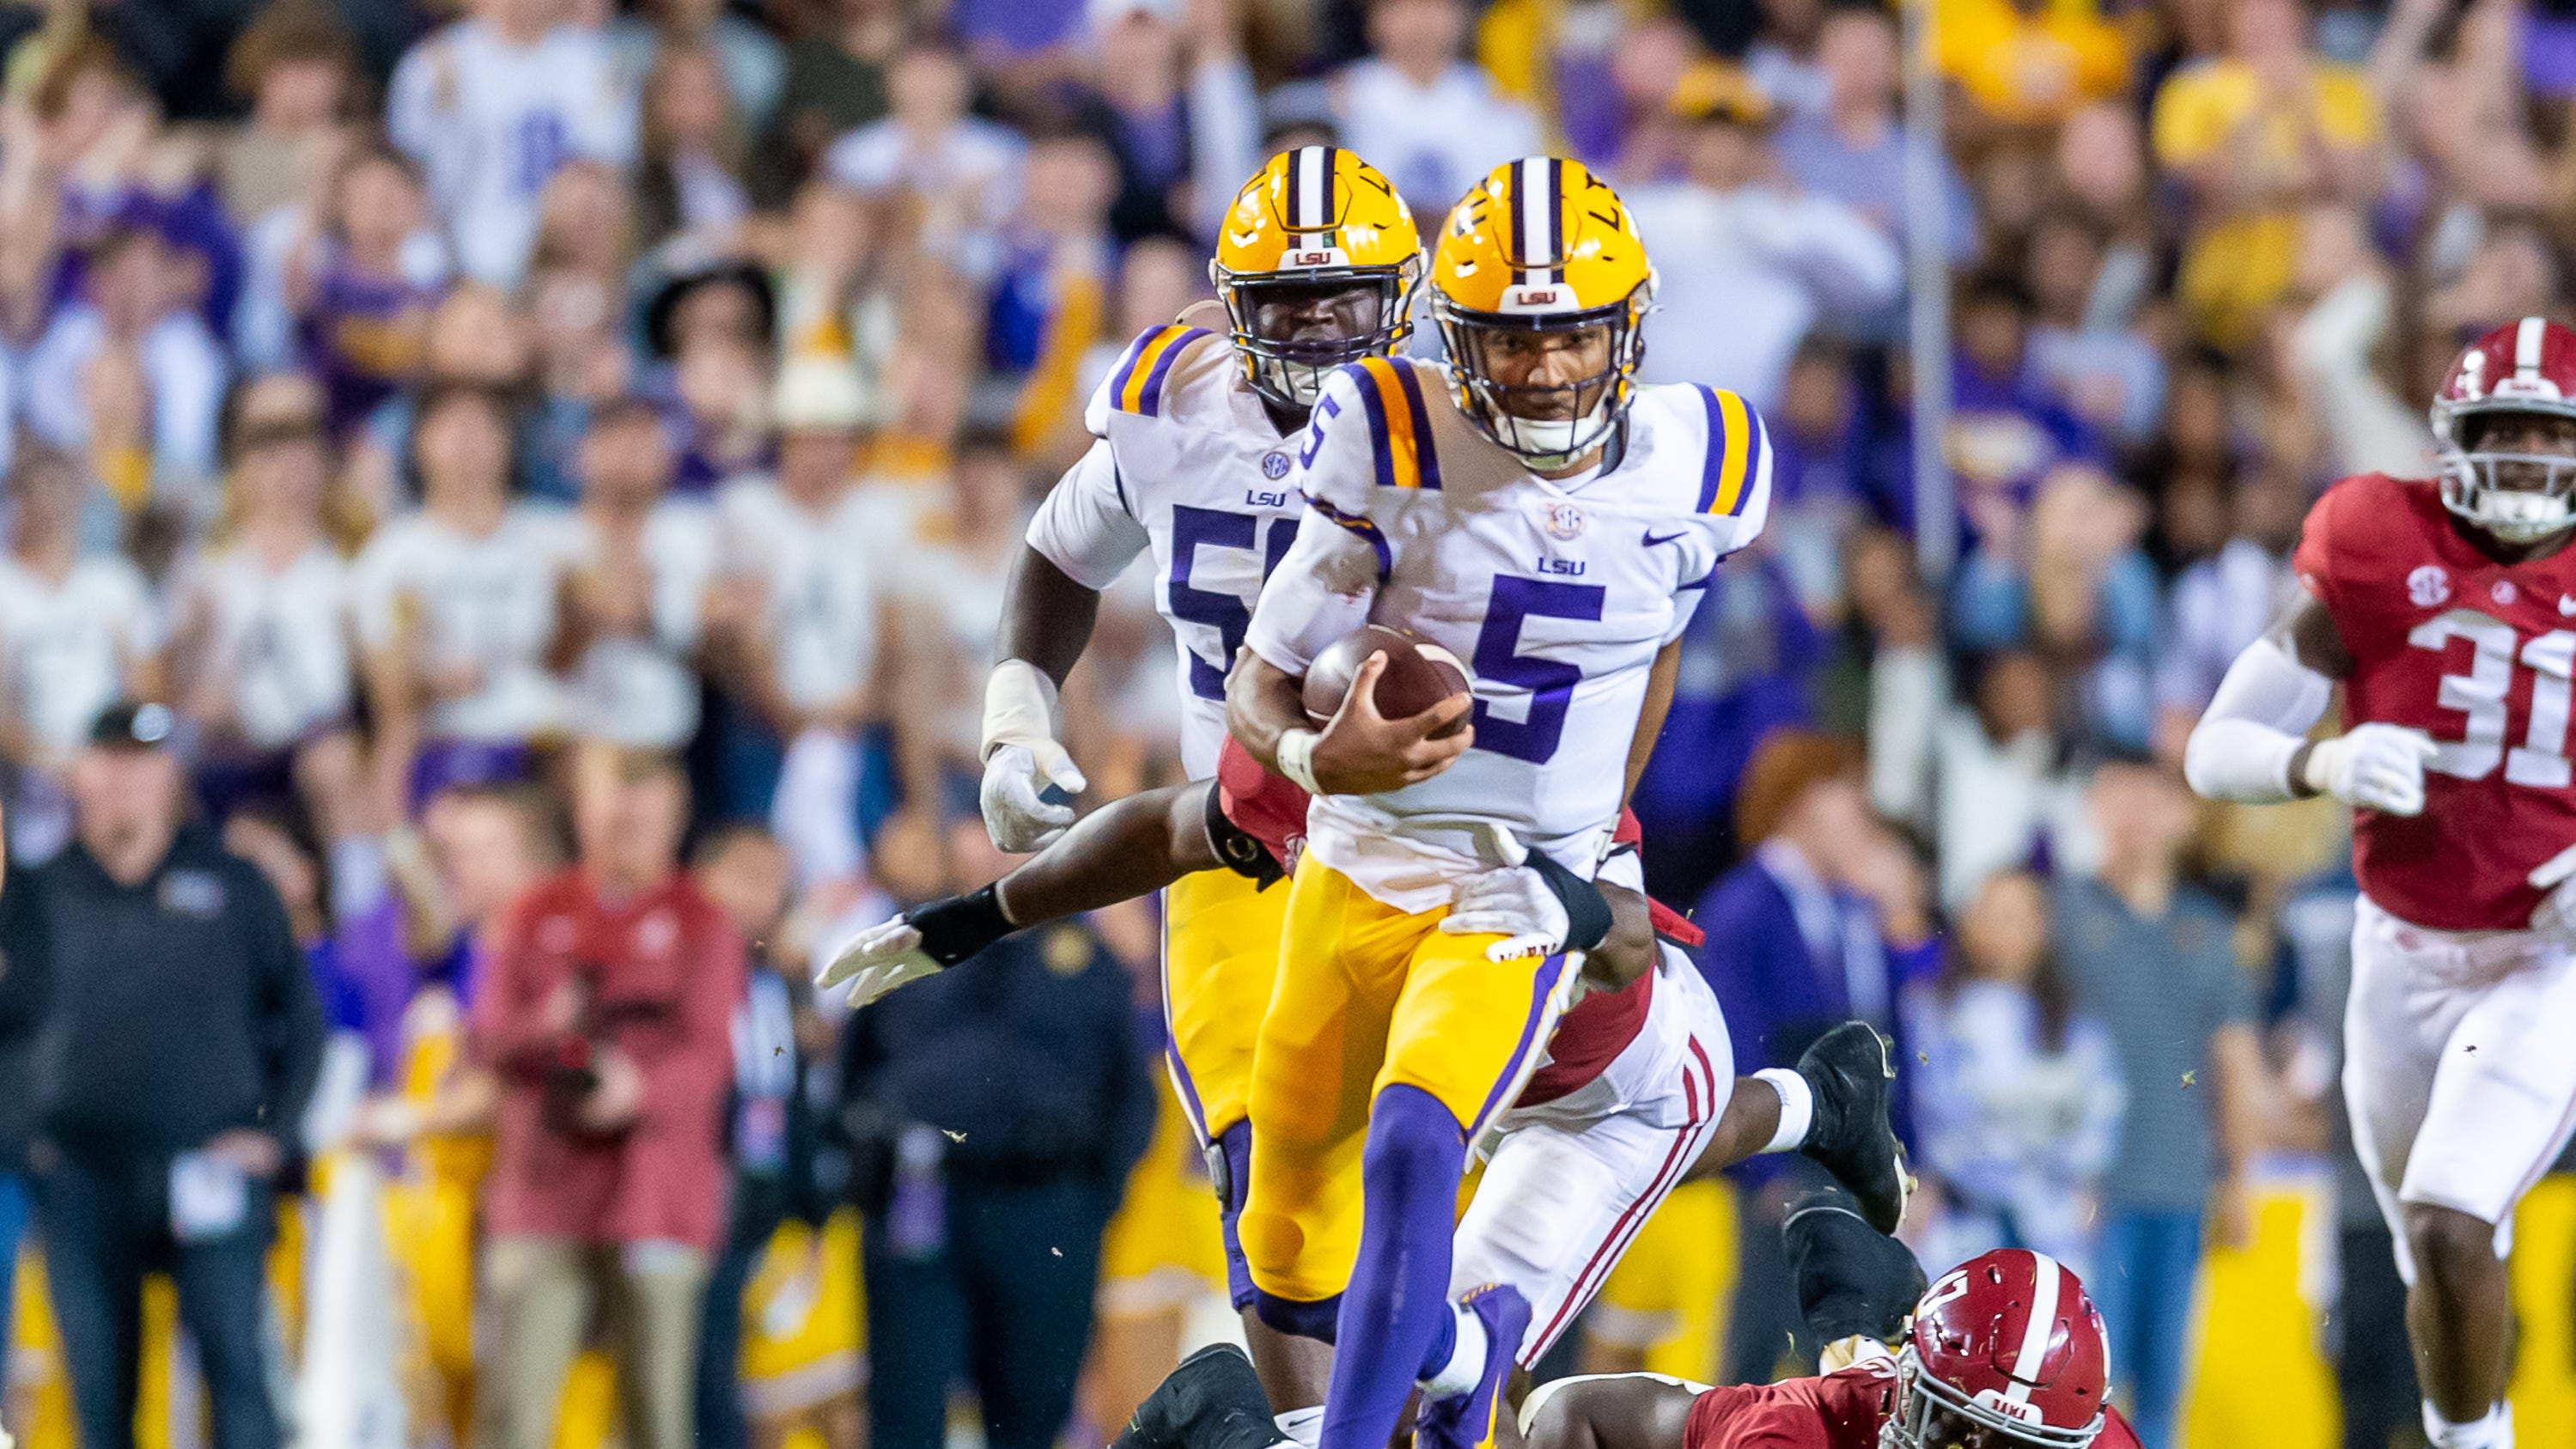 lsu-football-at-no-7-in-college-football-playoff-rankings-here-s-why-it-doesn-t-matter